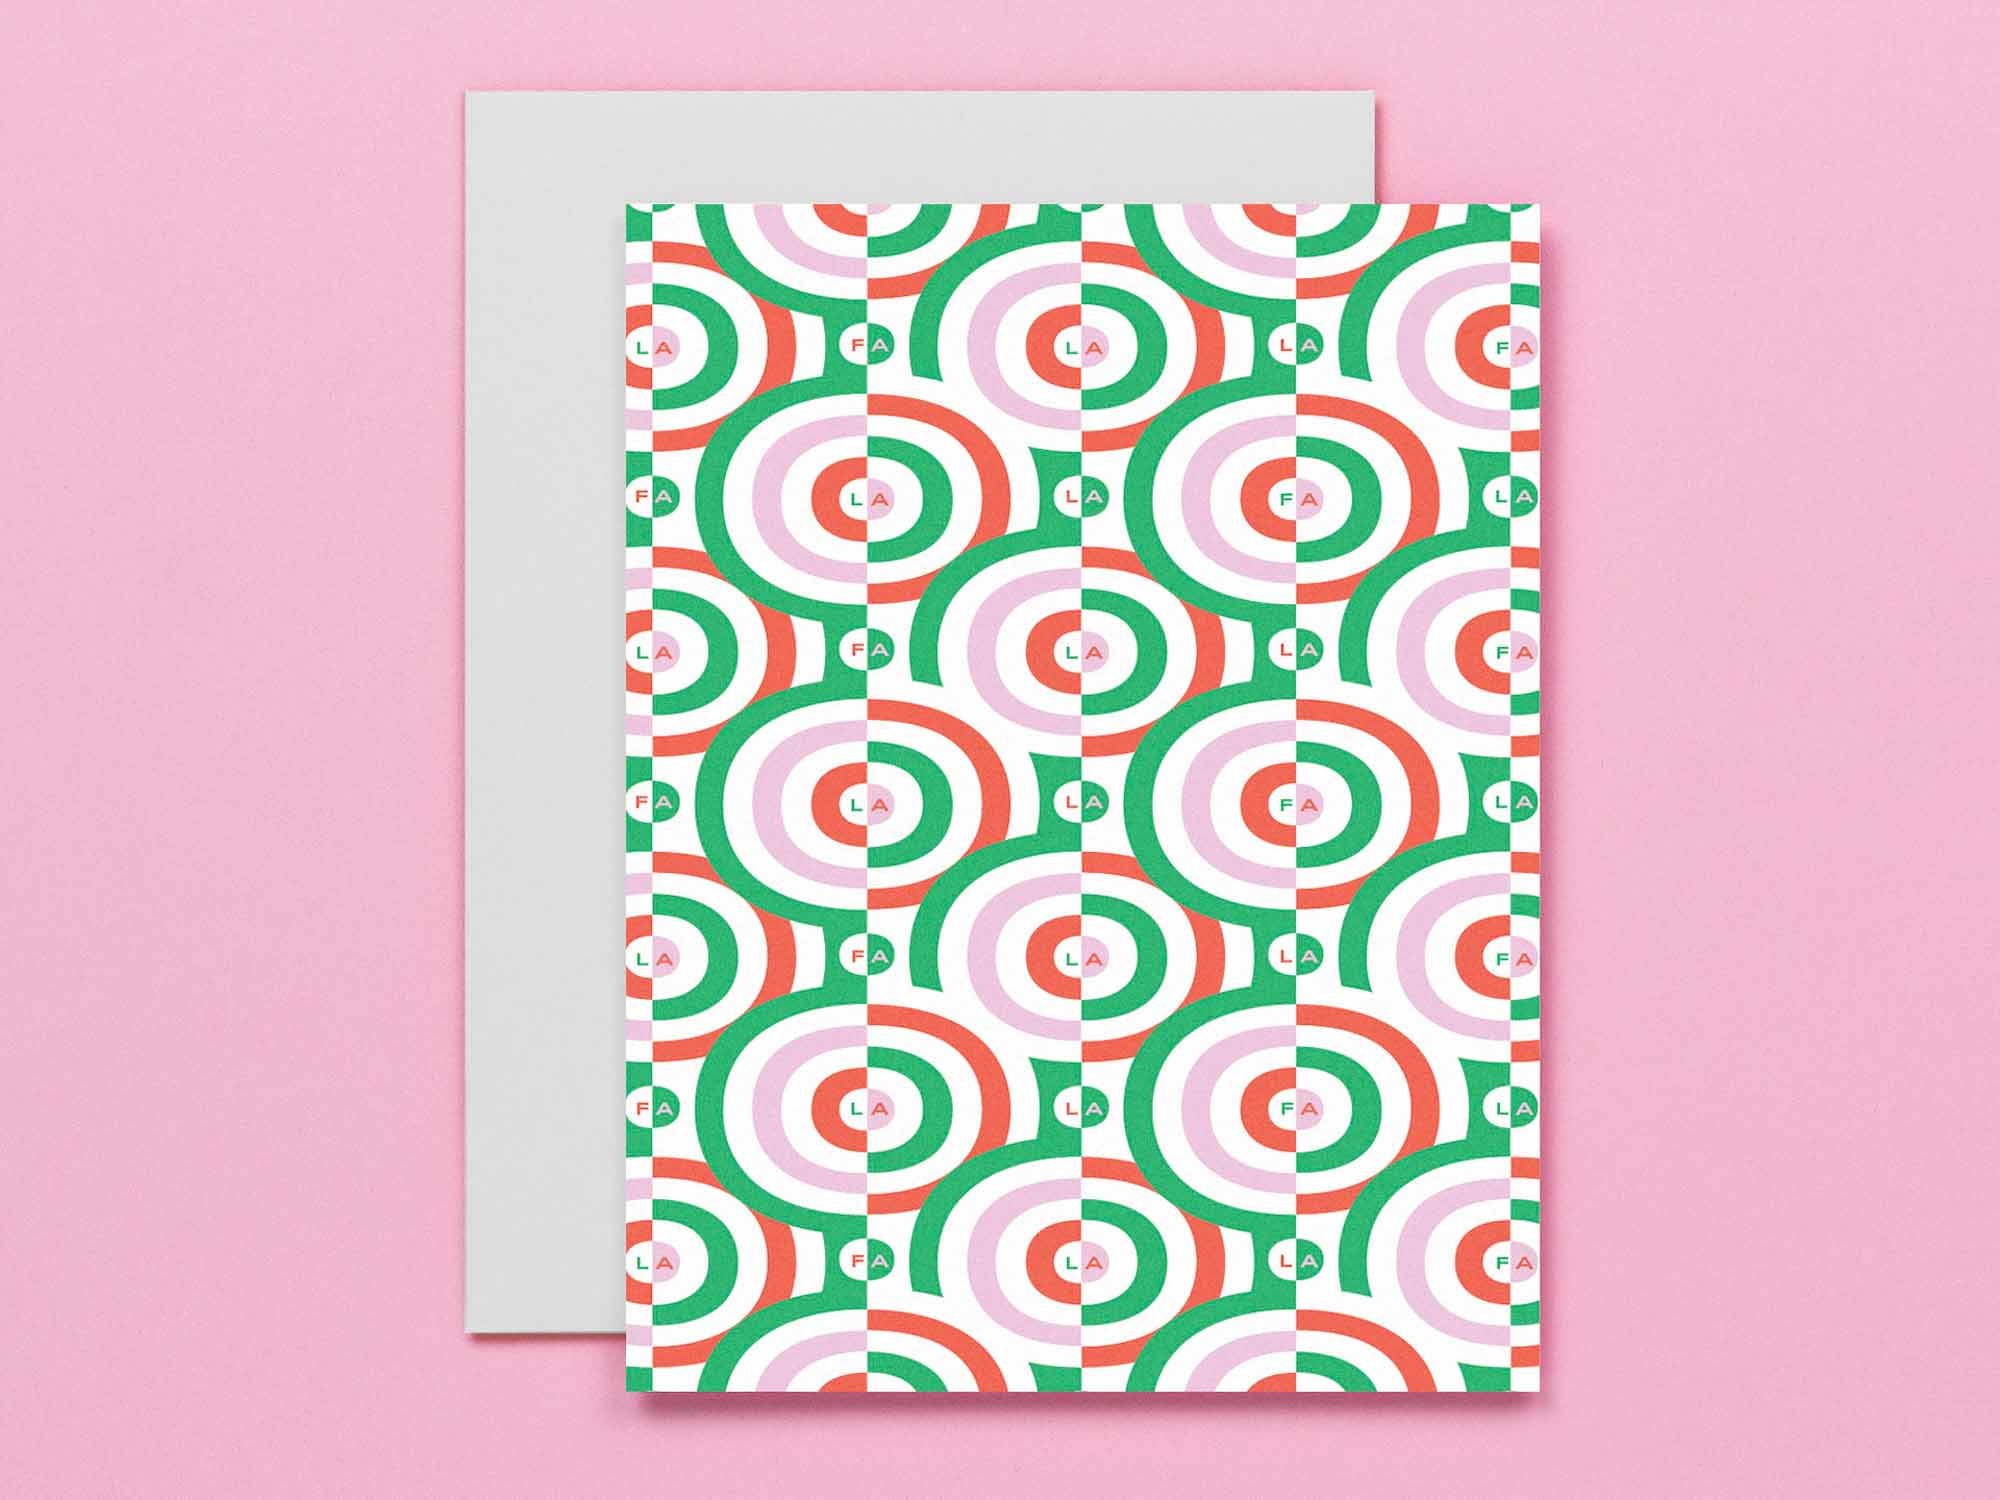 Mid-century and op art inspired pattern holiday card made up of nested rings and nestled fa la la la las. Made in USA by @mydarlin_bk